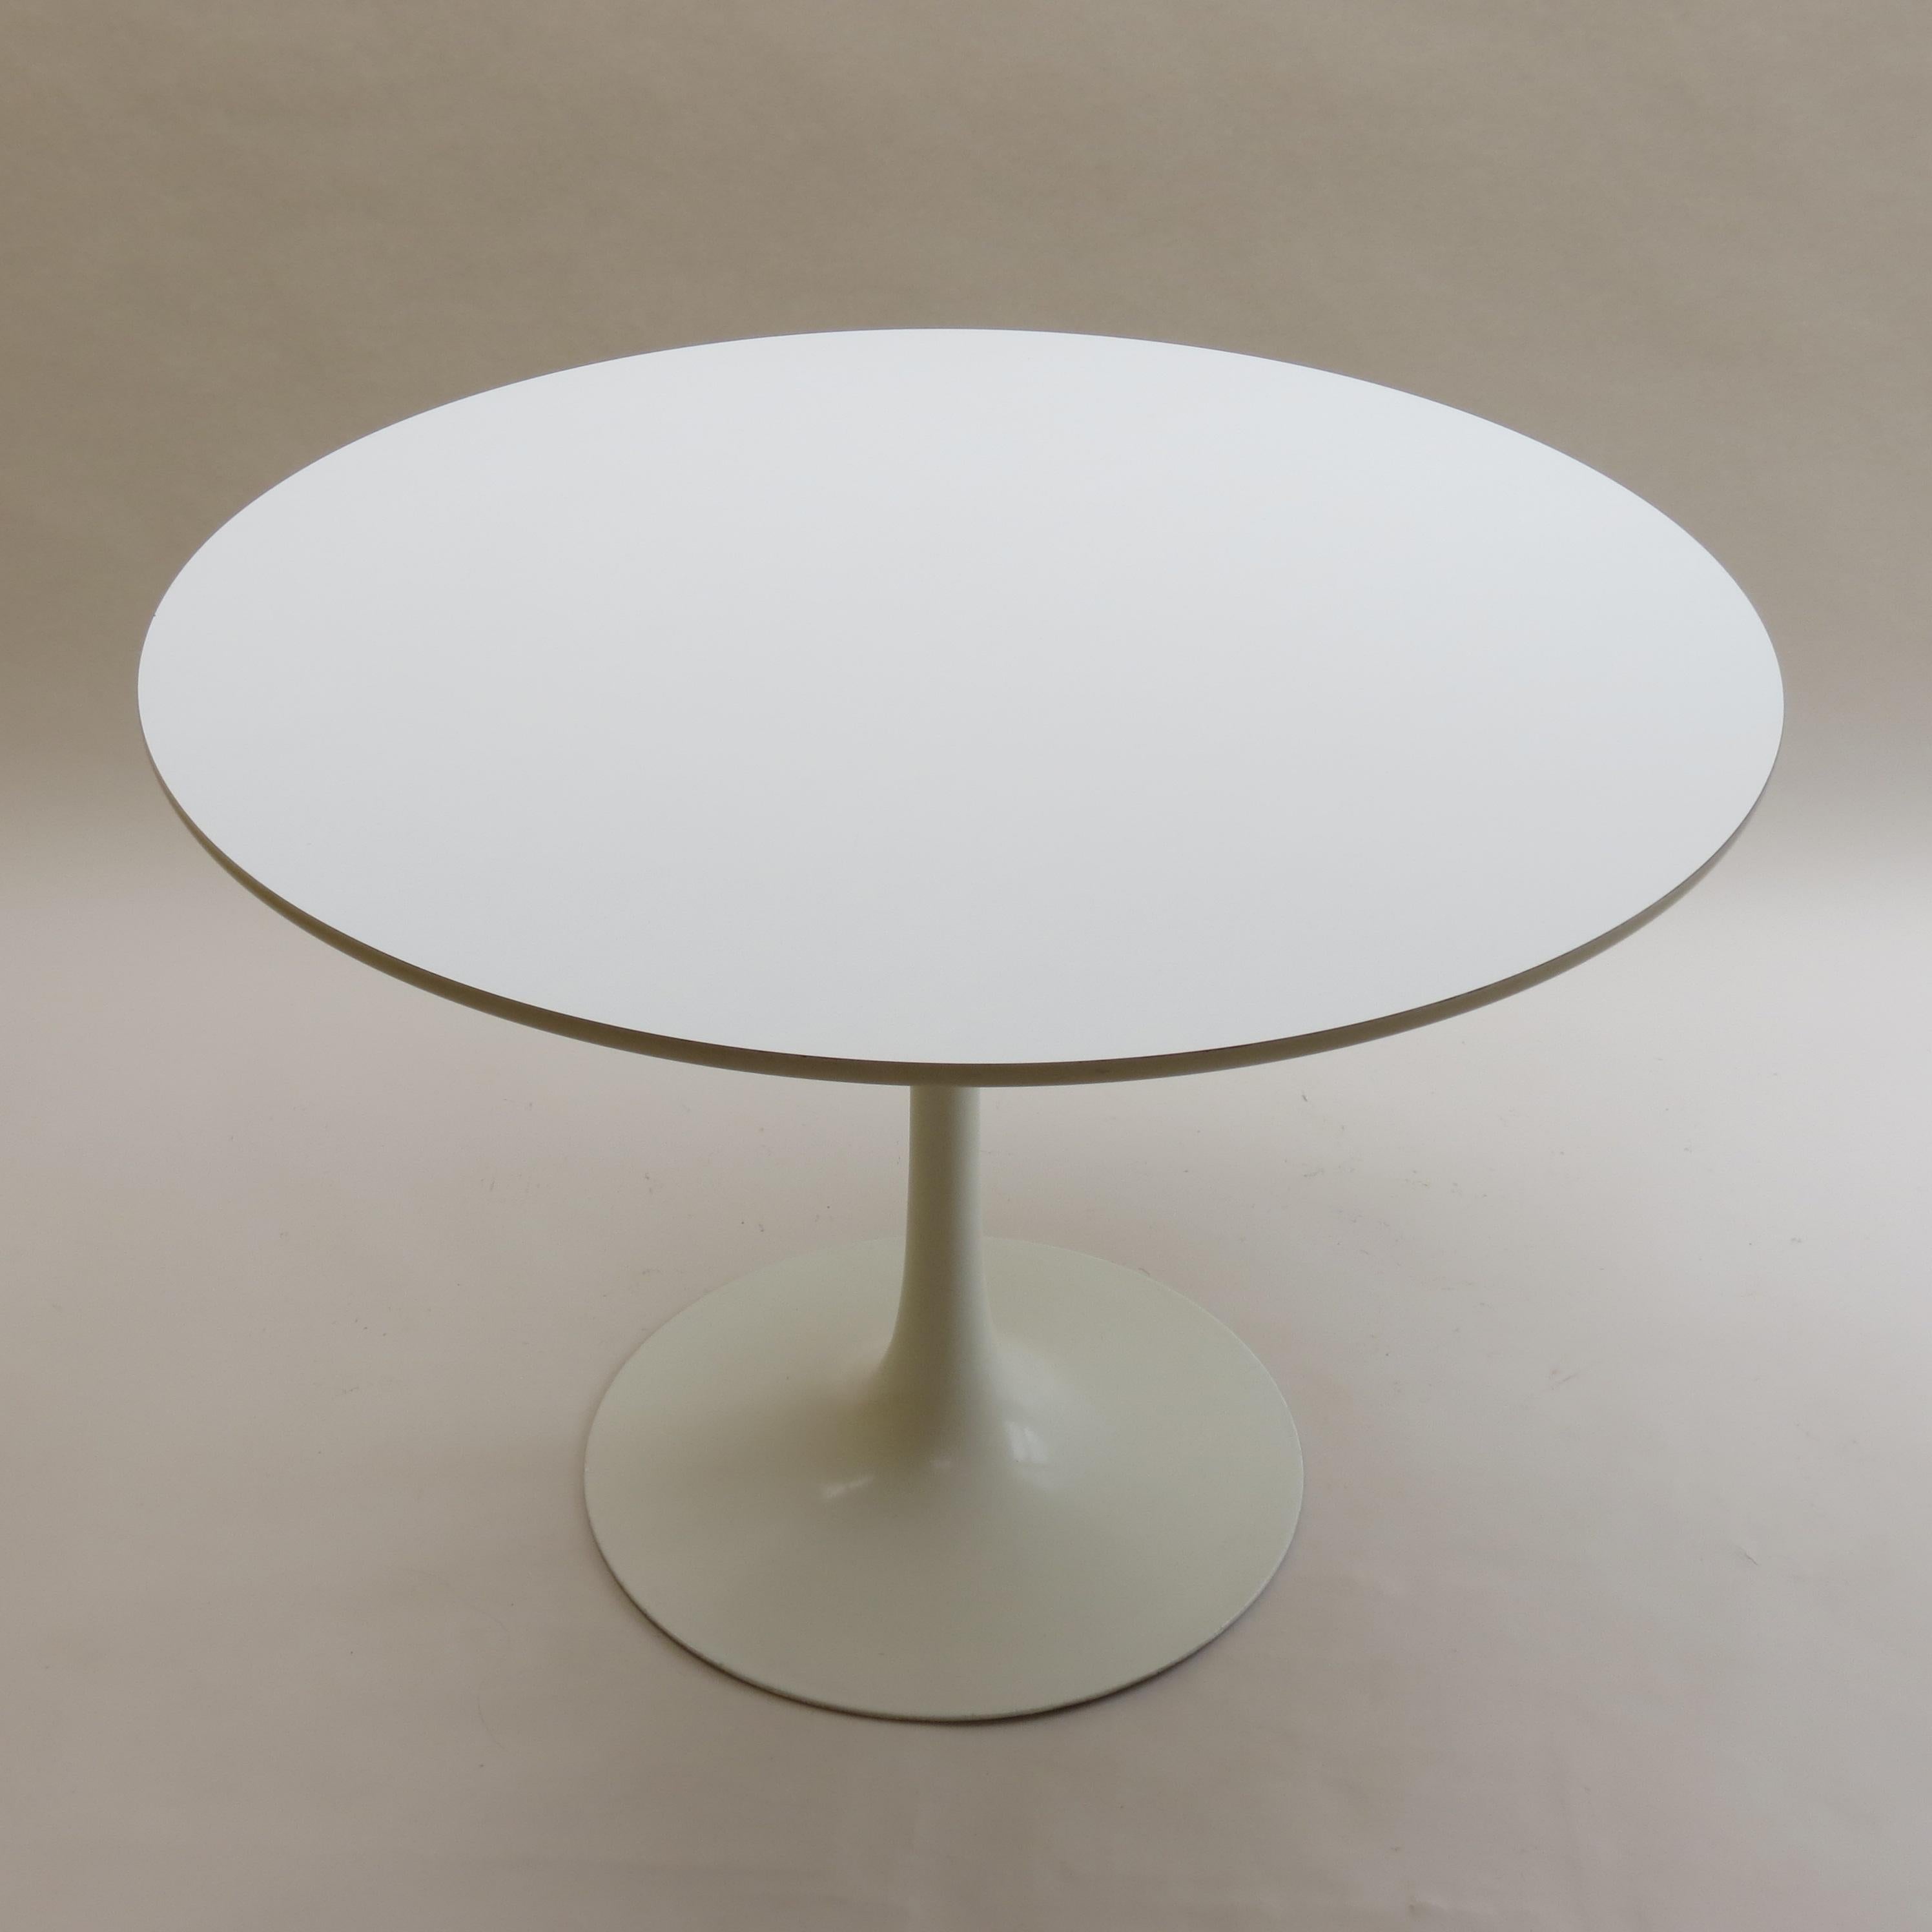 White tulip dining table, manufactured by Arkana, Bath UK and designed by Maurice Burke in the 1960s.
Painted cast aluminium base and Formica top.

In good vintage condition, some light wear to the base and light surface scratches to the top from